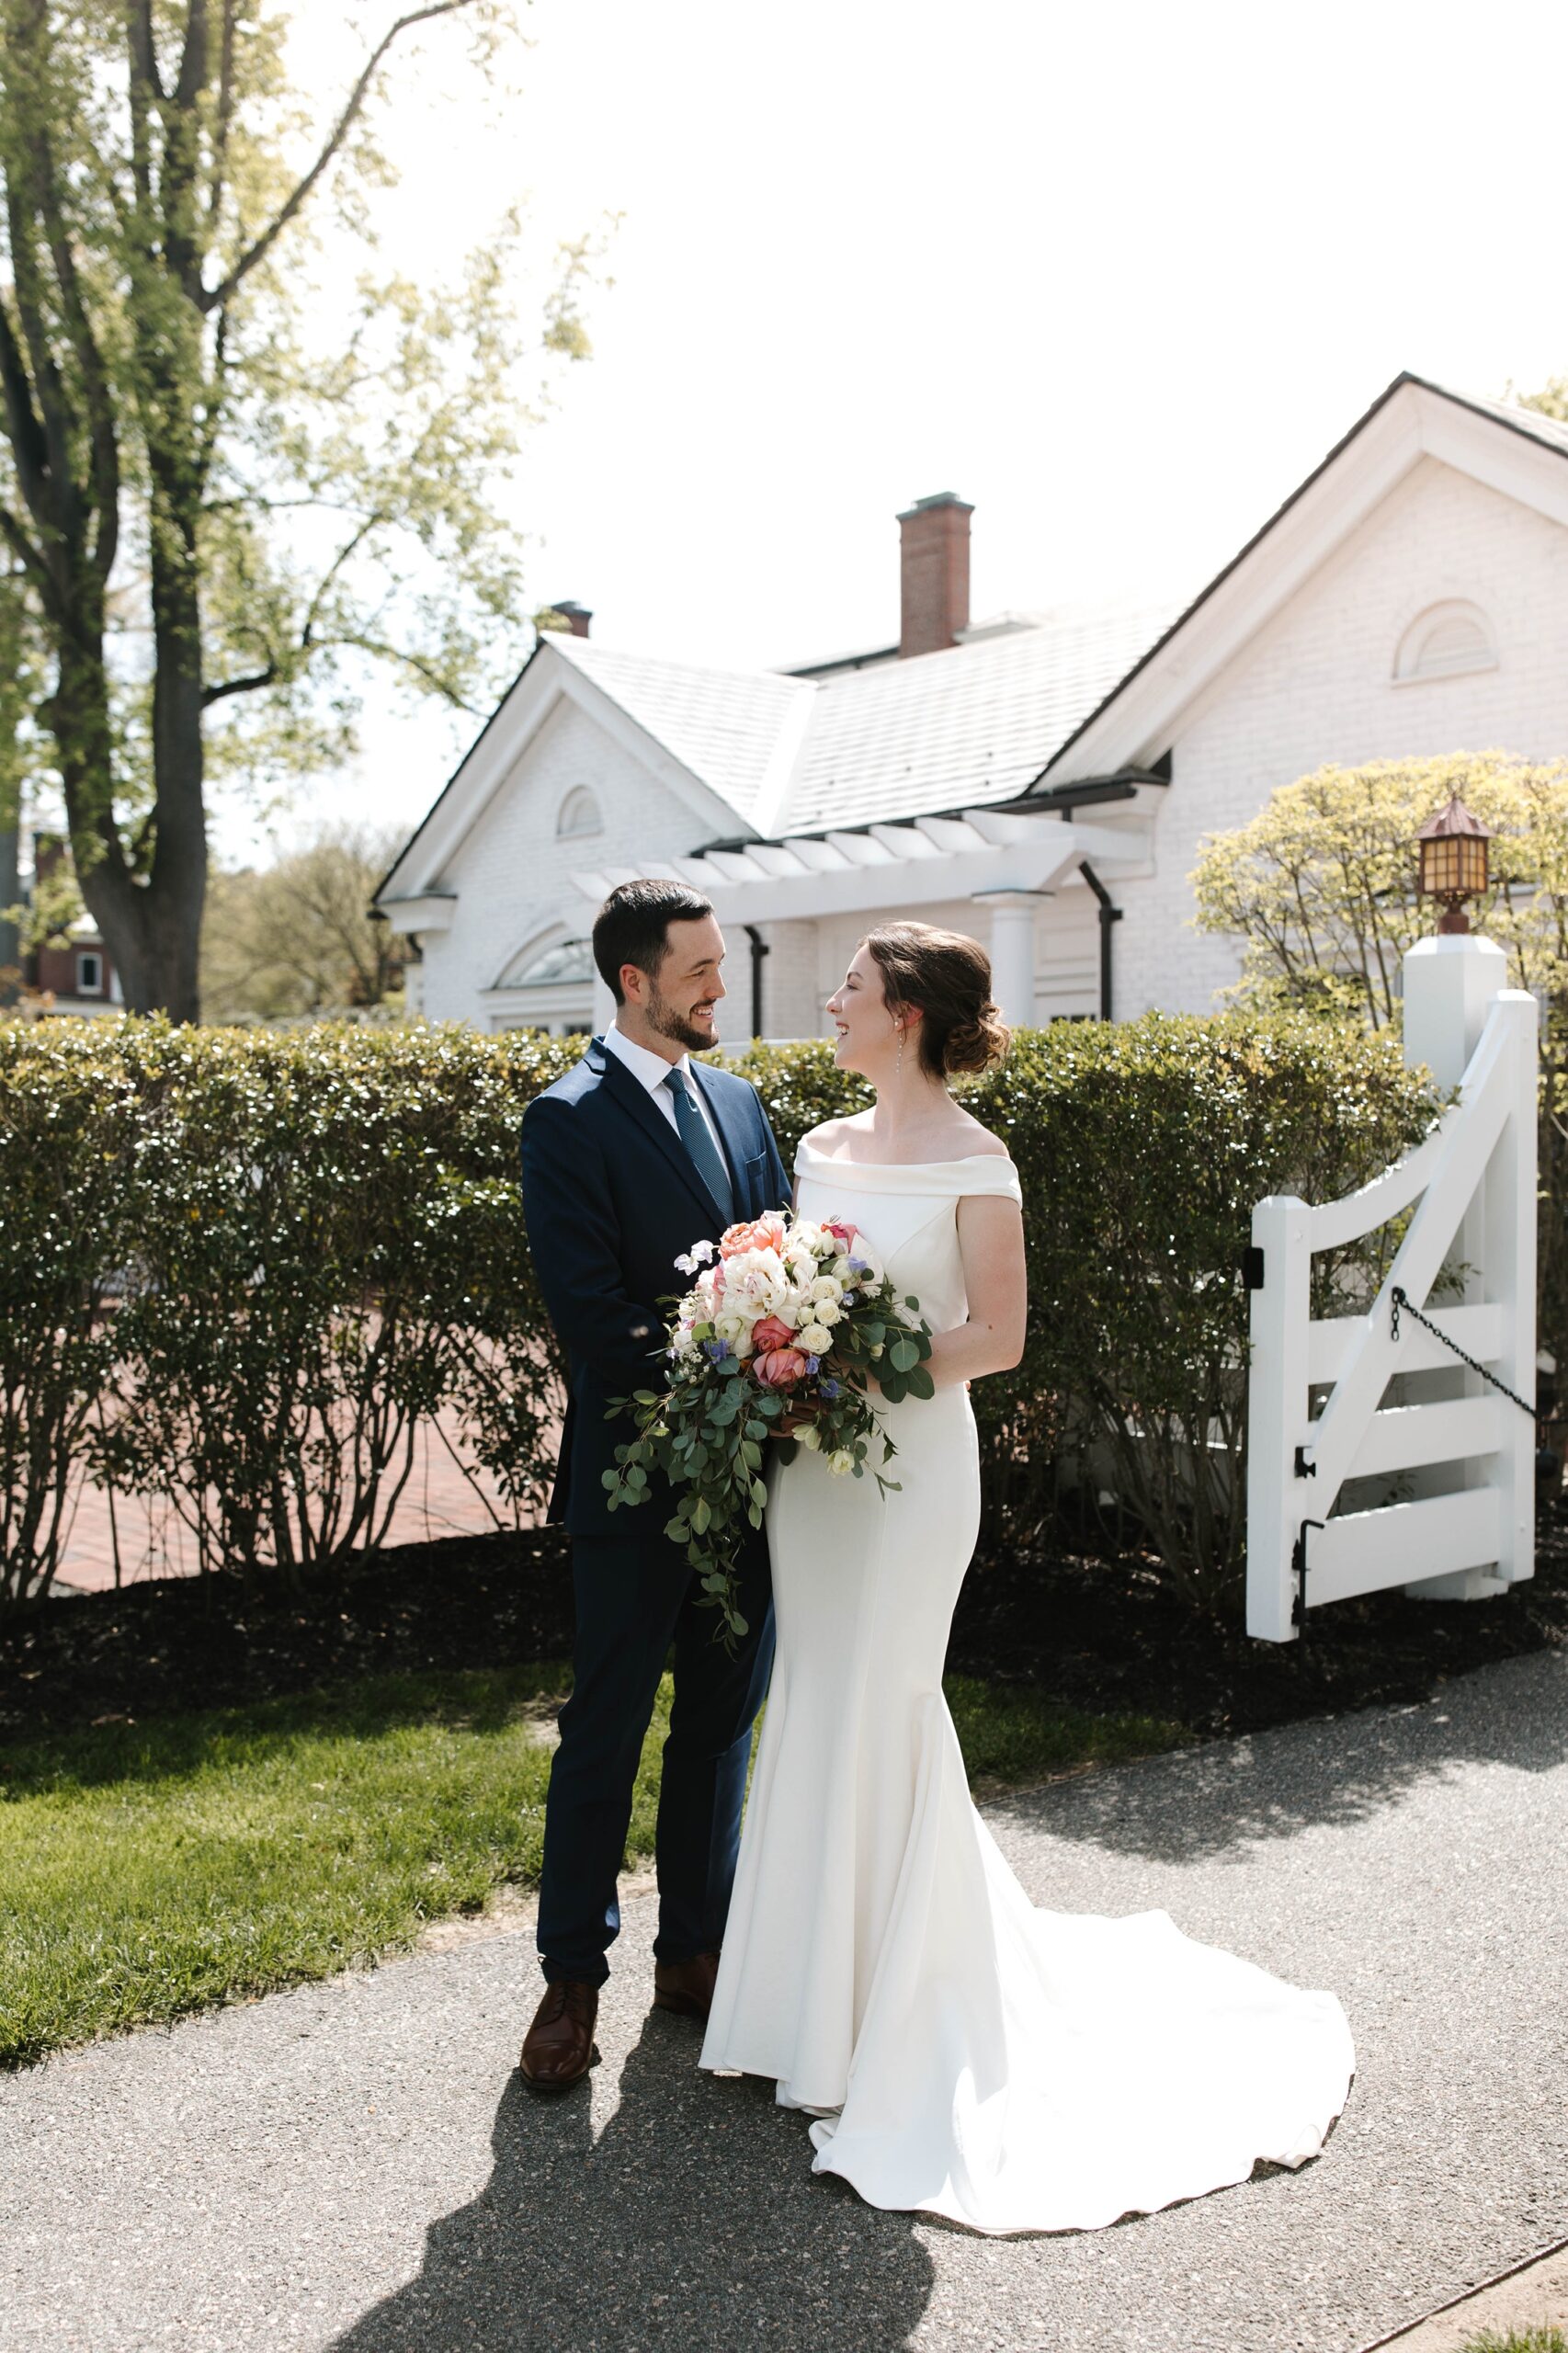 The bride and groom smiled at each other at their New England elopement